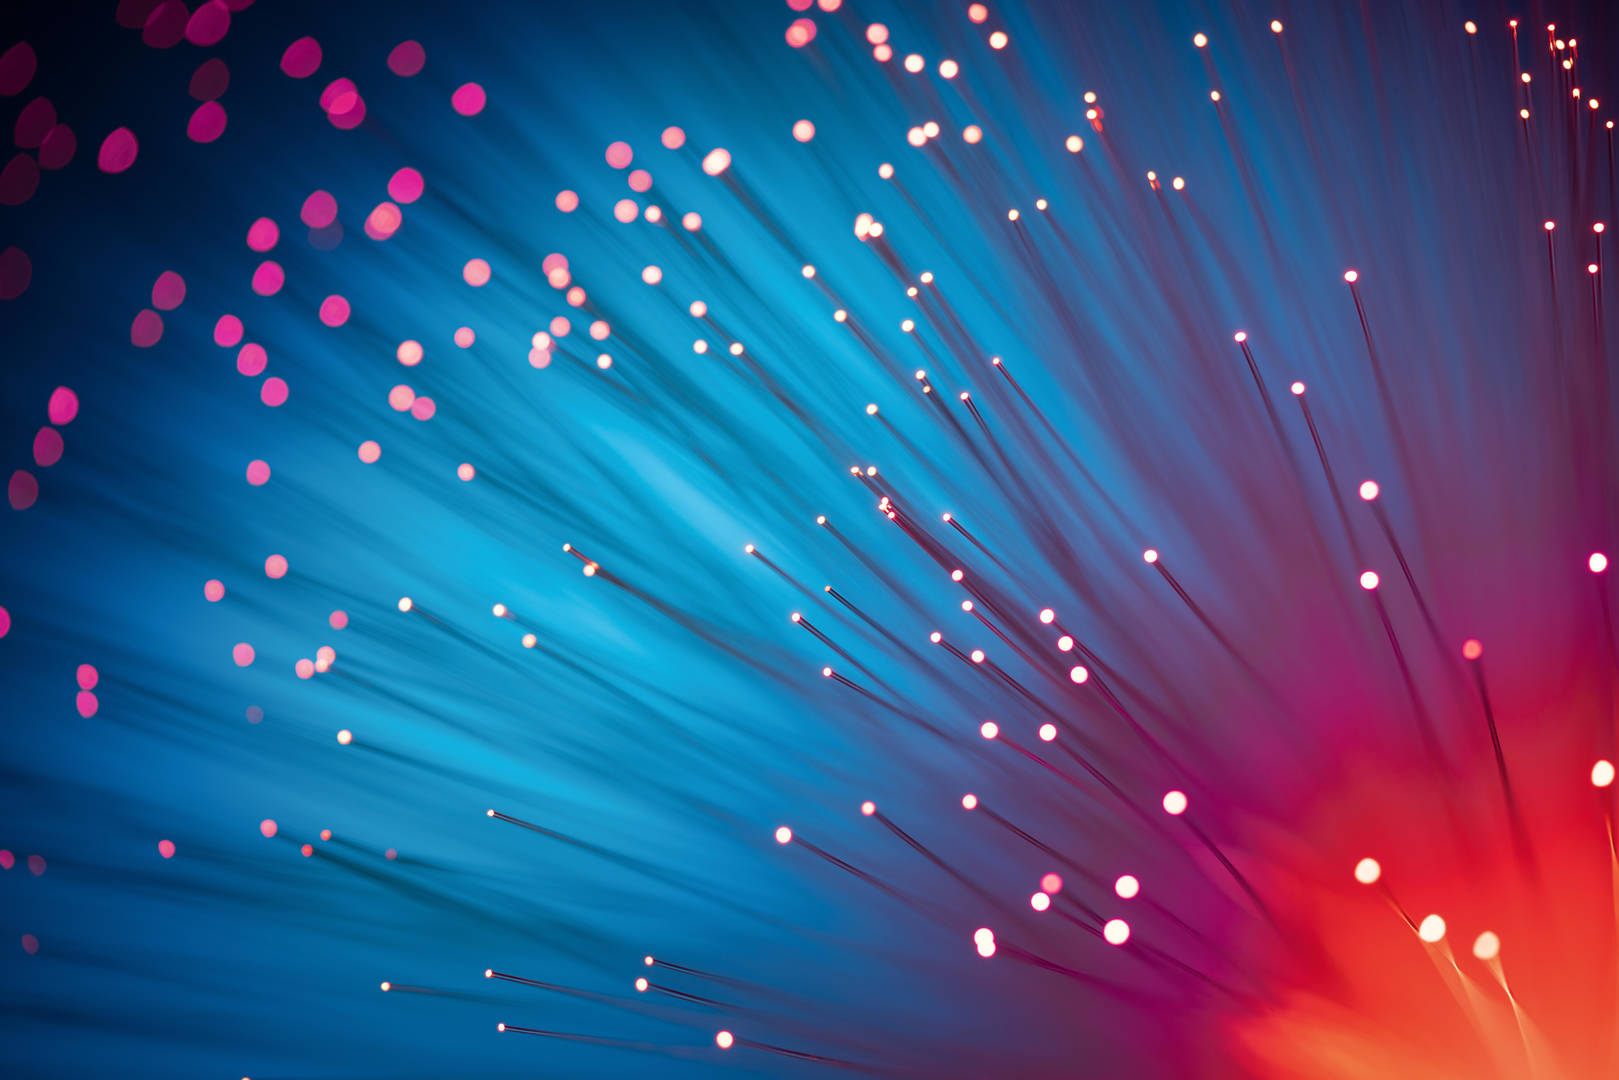 Abstract image of Red Color Illuminated Fiber Optics Selective Focus on Blue Background.